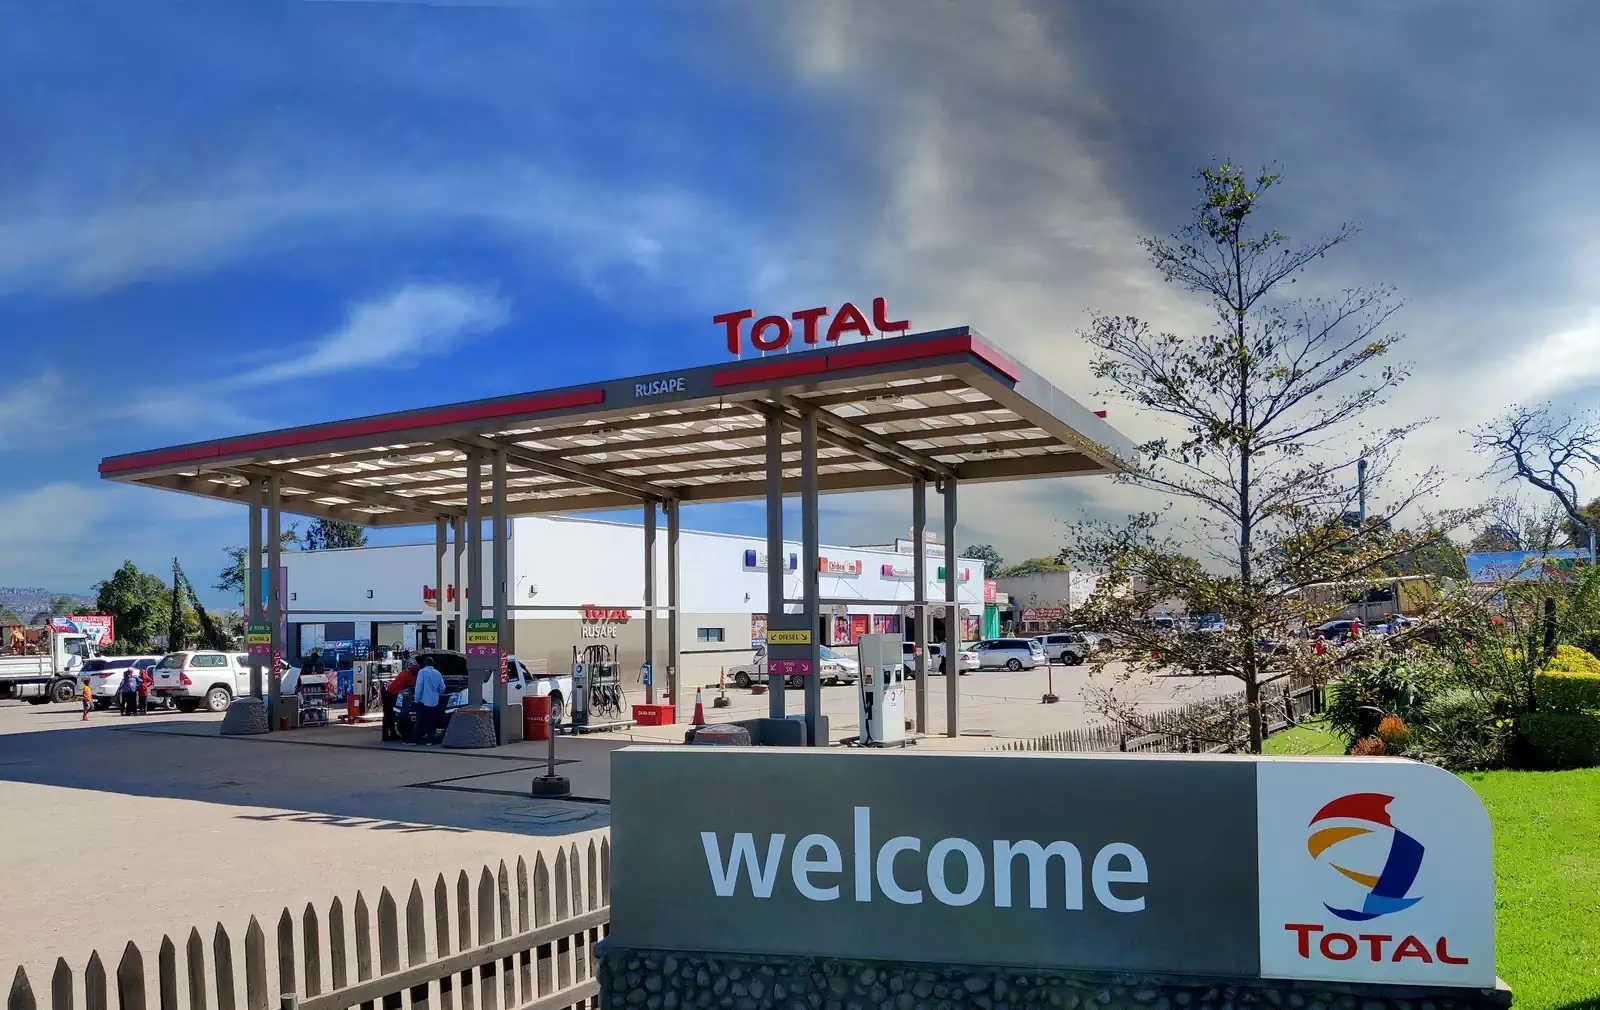 Iconic welcome sign with branded canopy on petrol station in Rusape